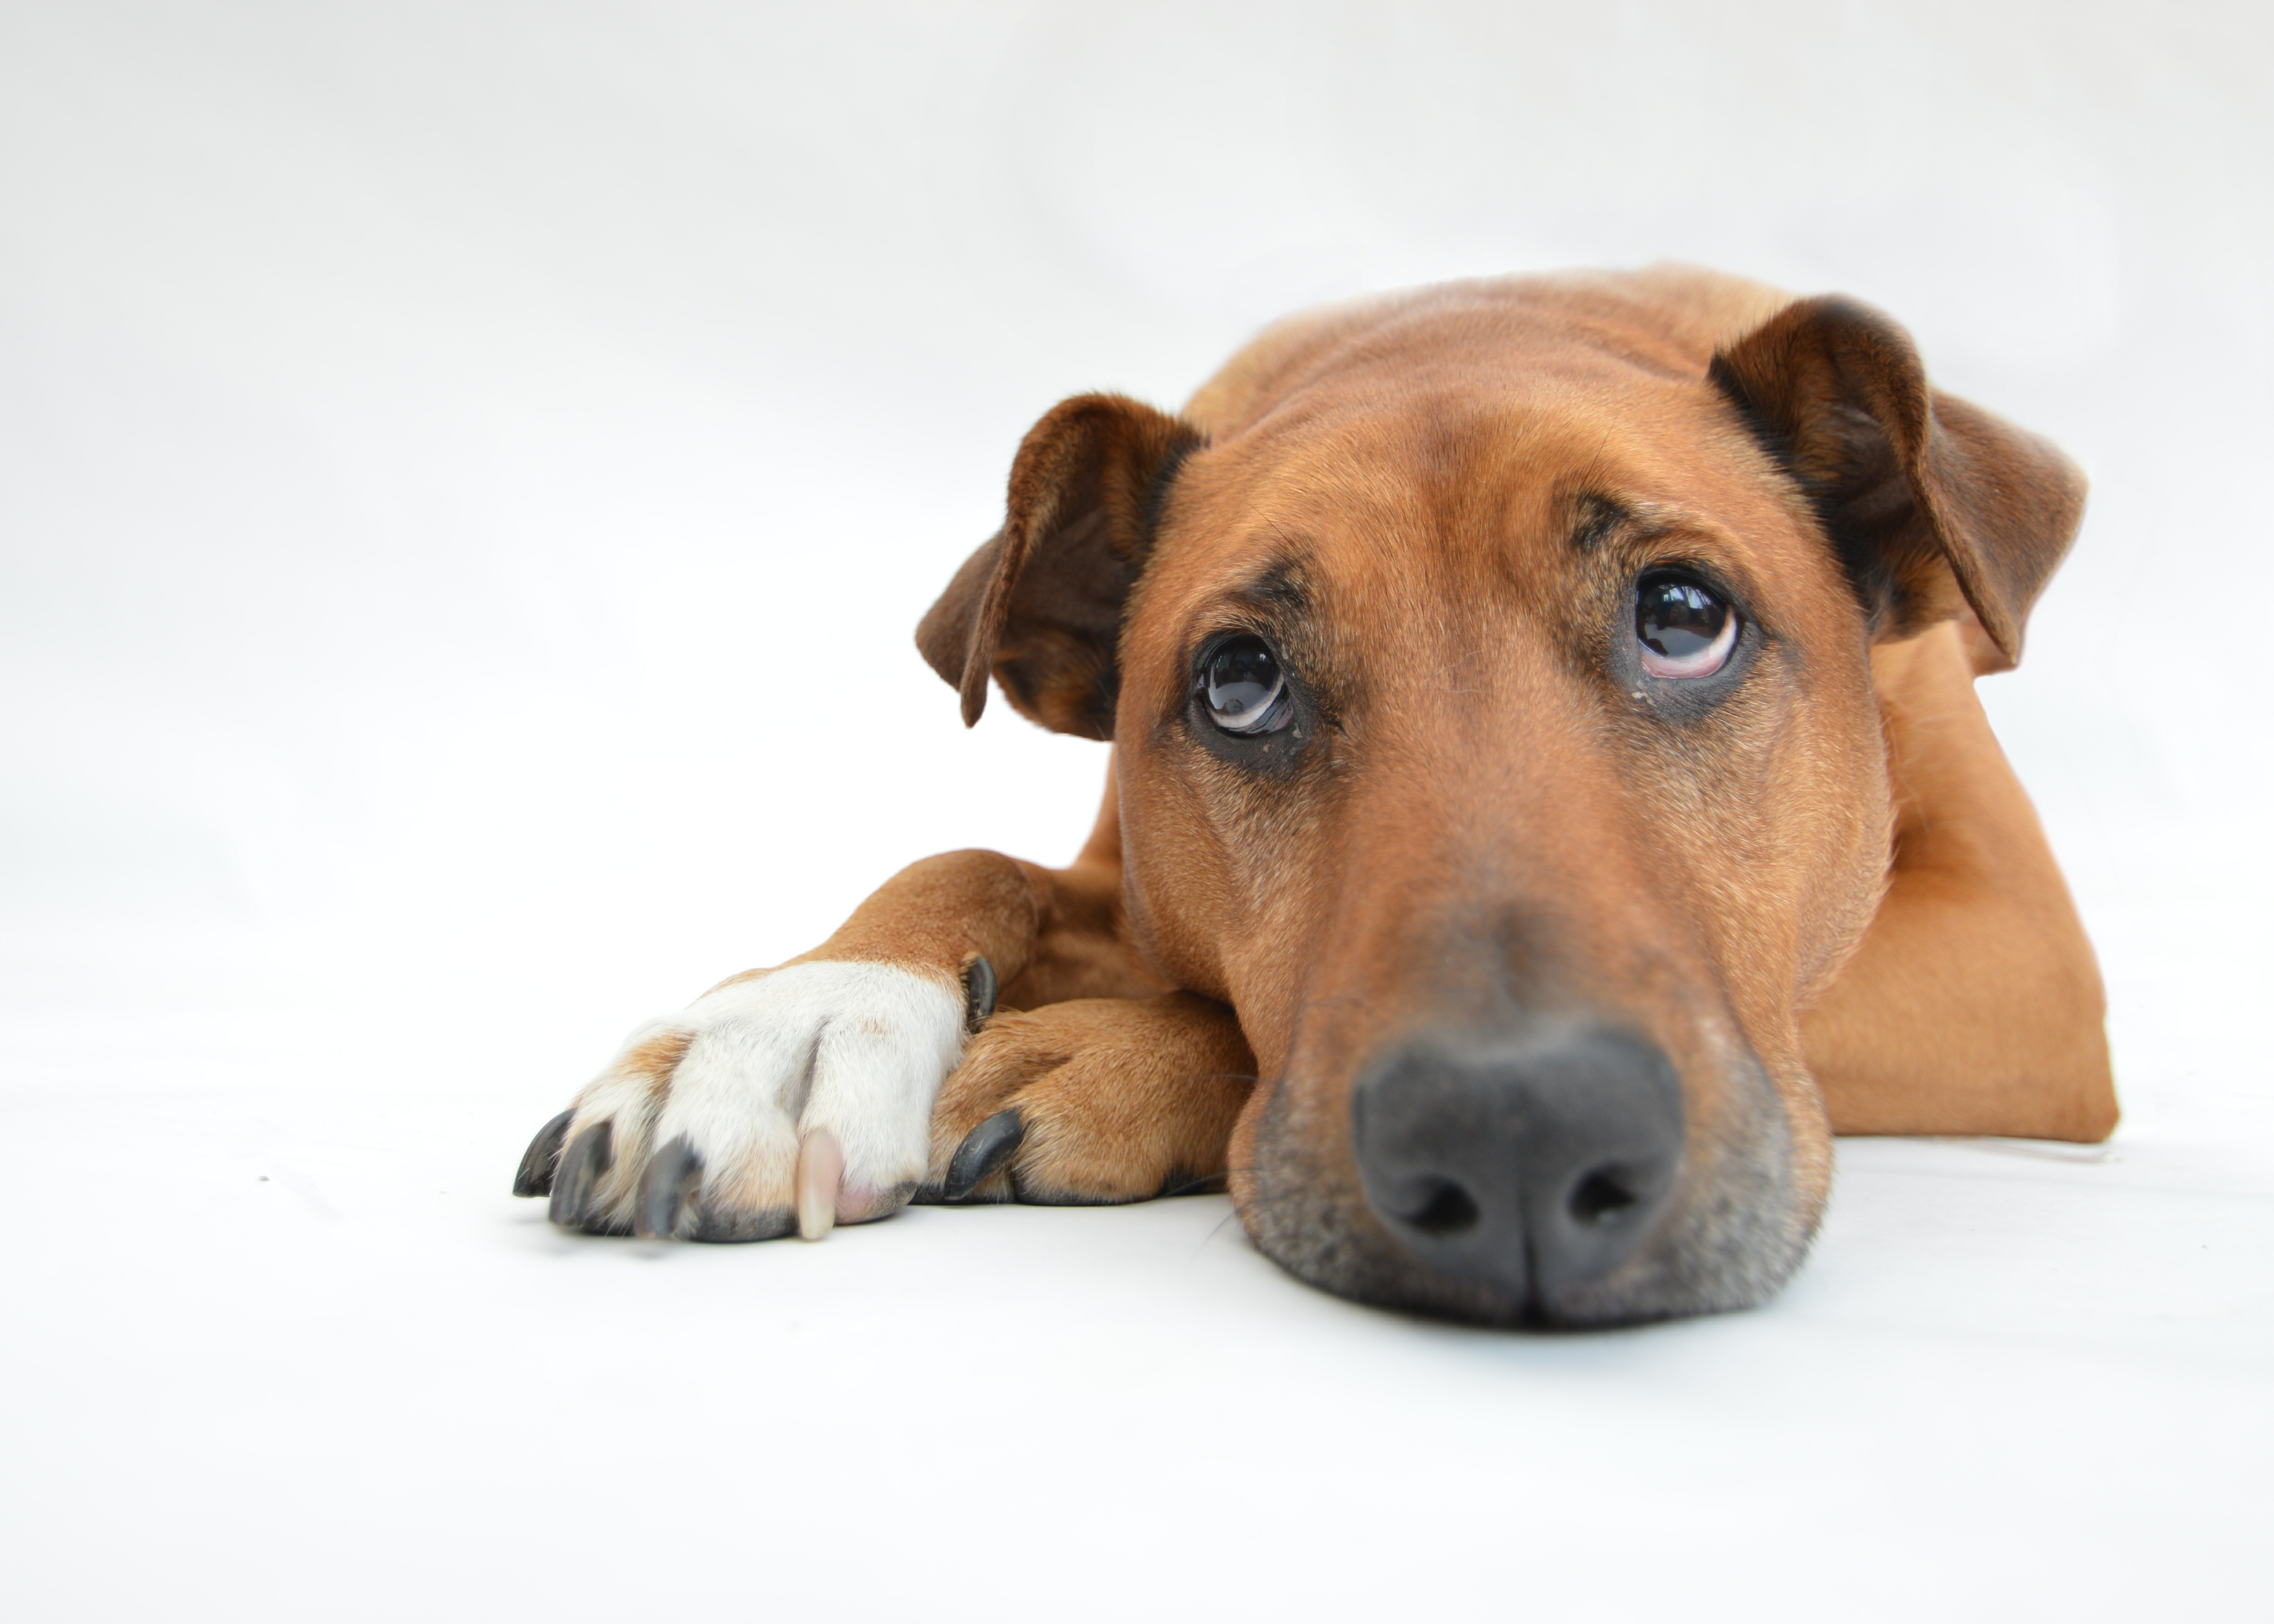 Free Images : puppy, cute, canine, pet, brown, pensive, sad, lazy ...